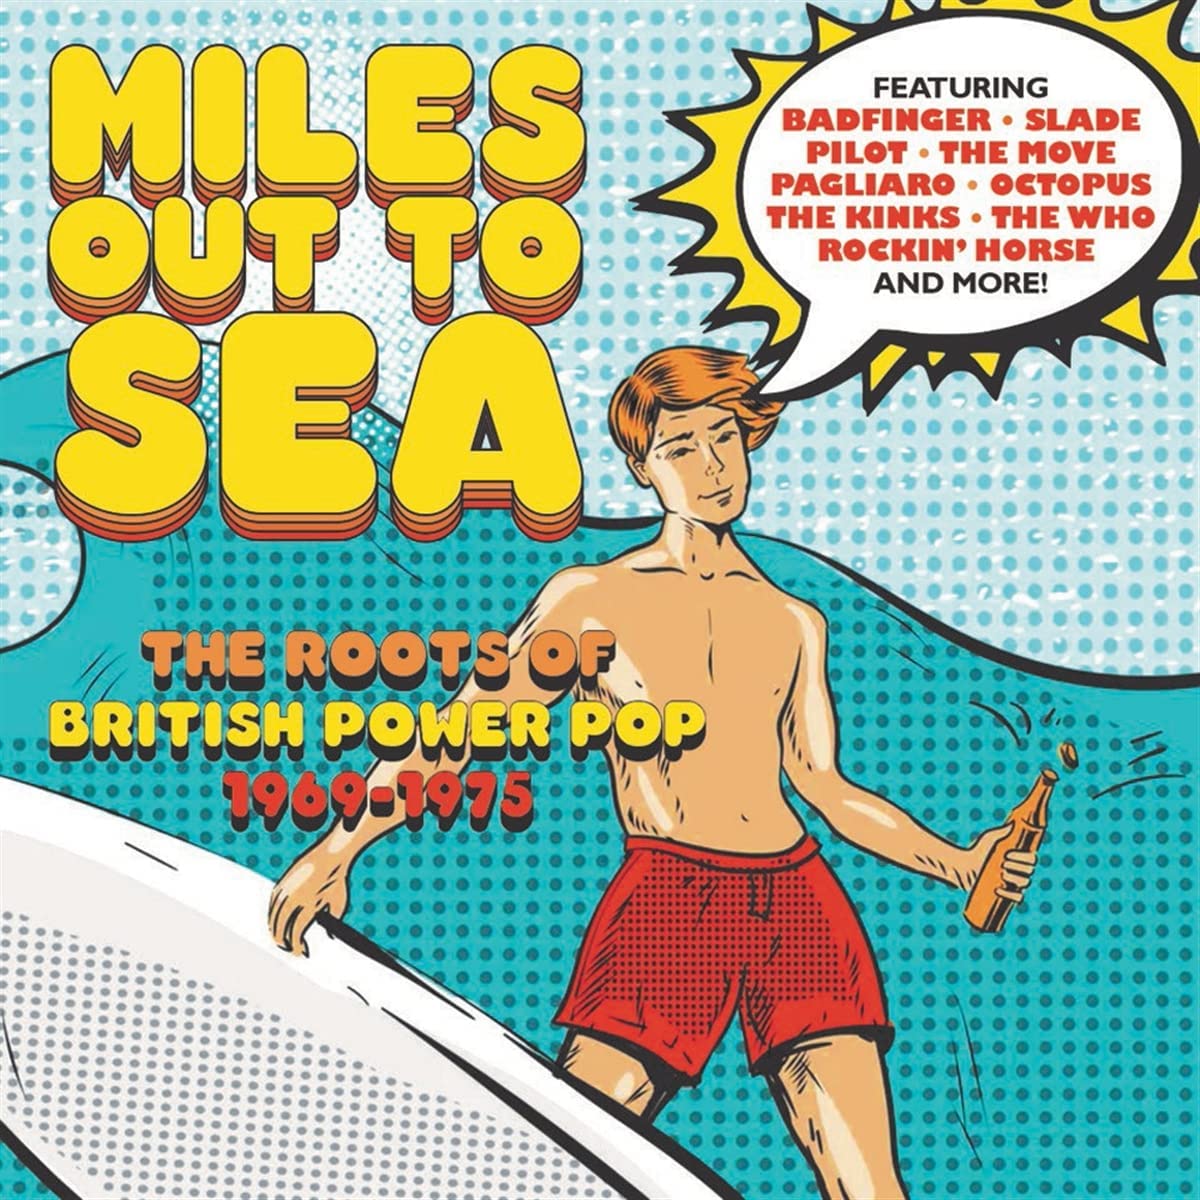 V/A - BRINSLEY SCHWARZ / WHO / KINKS - Miles Out To Sea: Roots Of British Power Pop 1969-1975